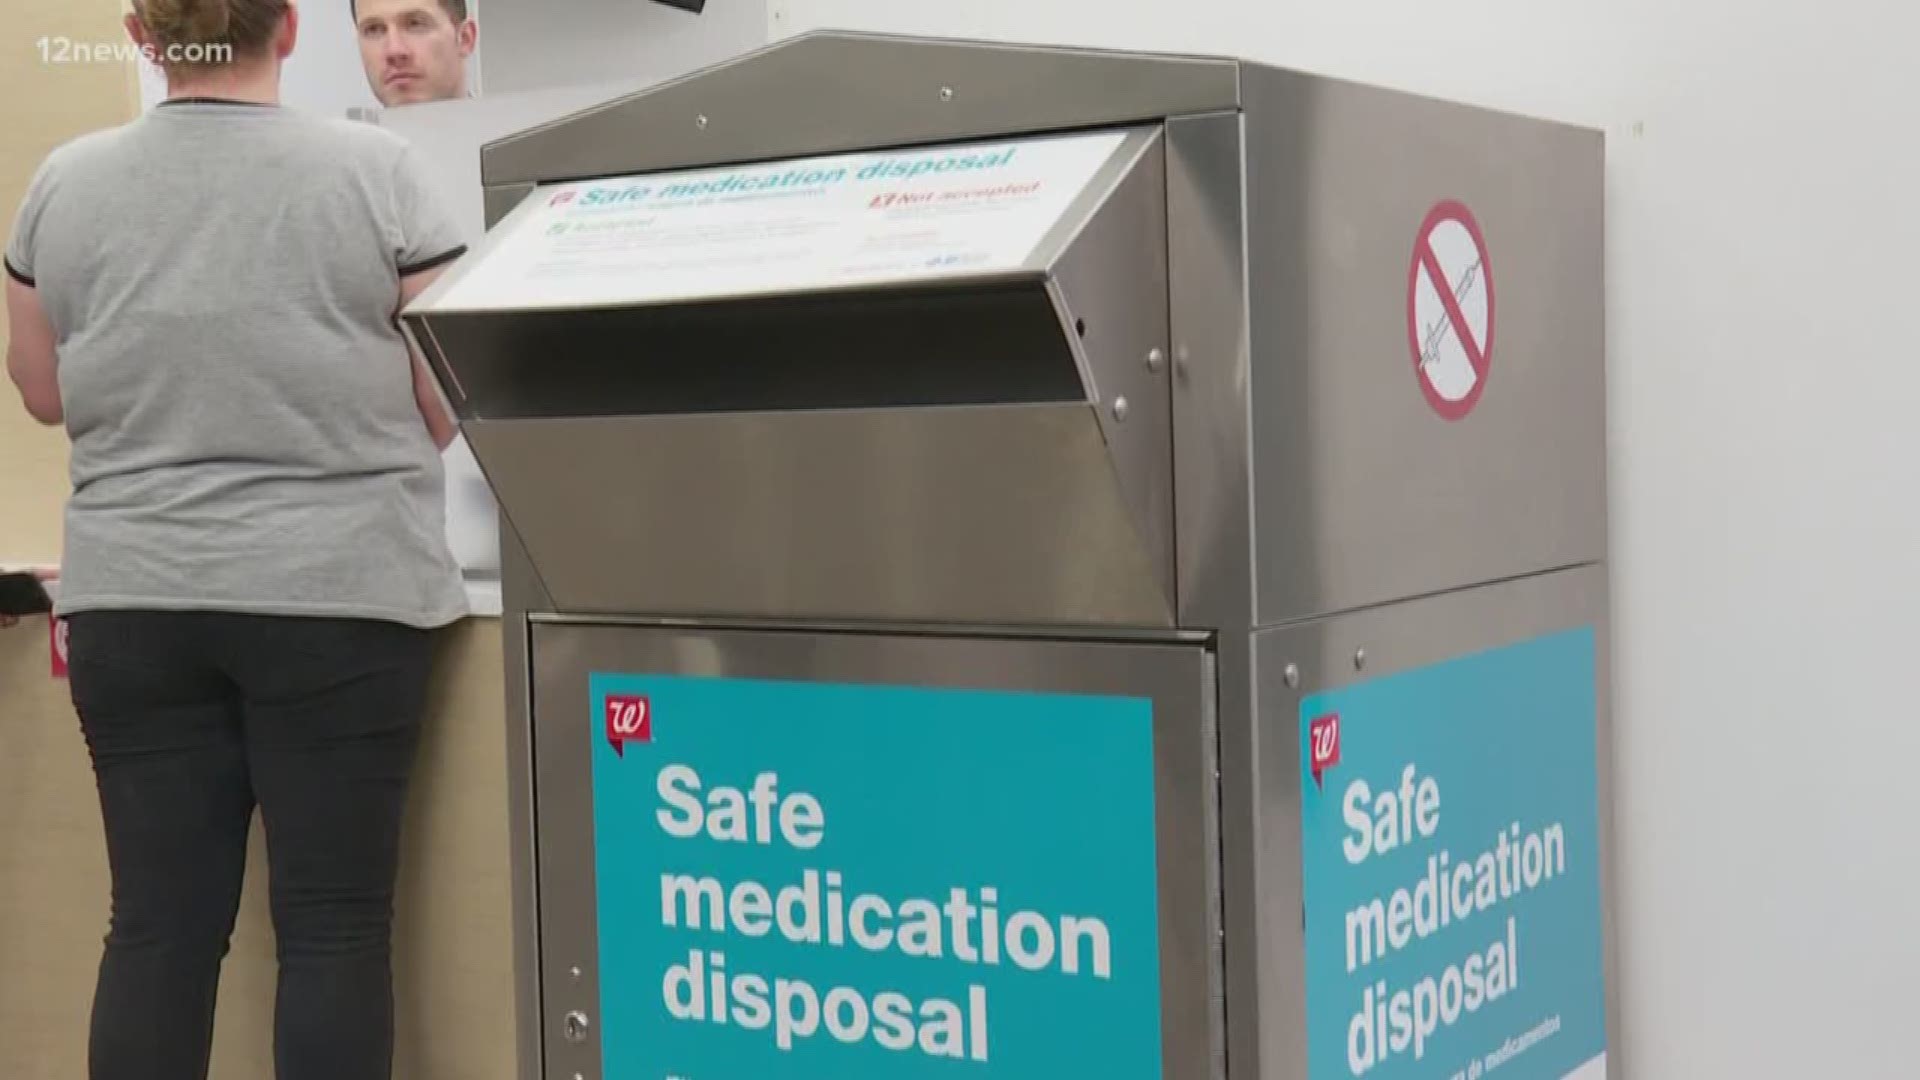 35 Walgreens locations in Arizona now have safe medication disposal kiosks. The kiosks are a safe way to get rid of unnecessary medications.